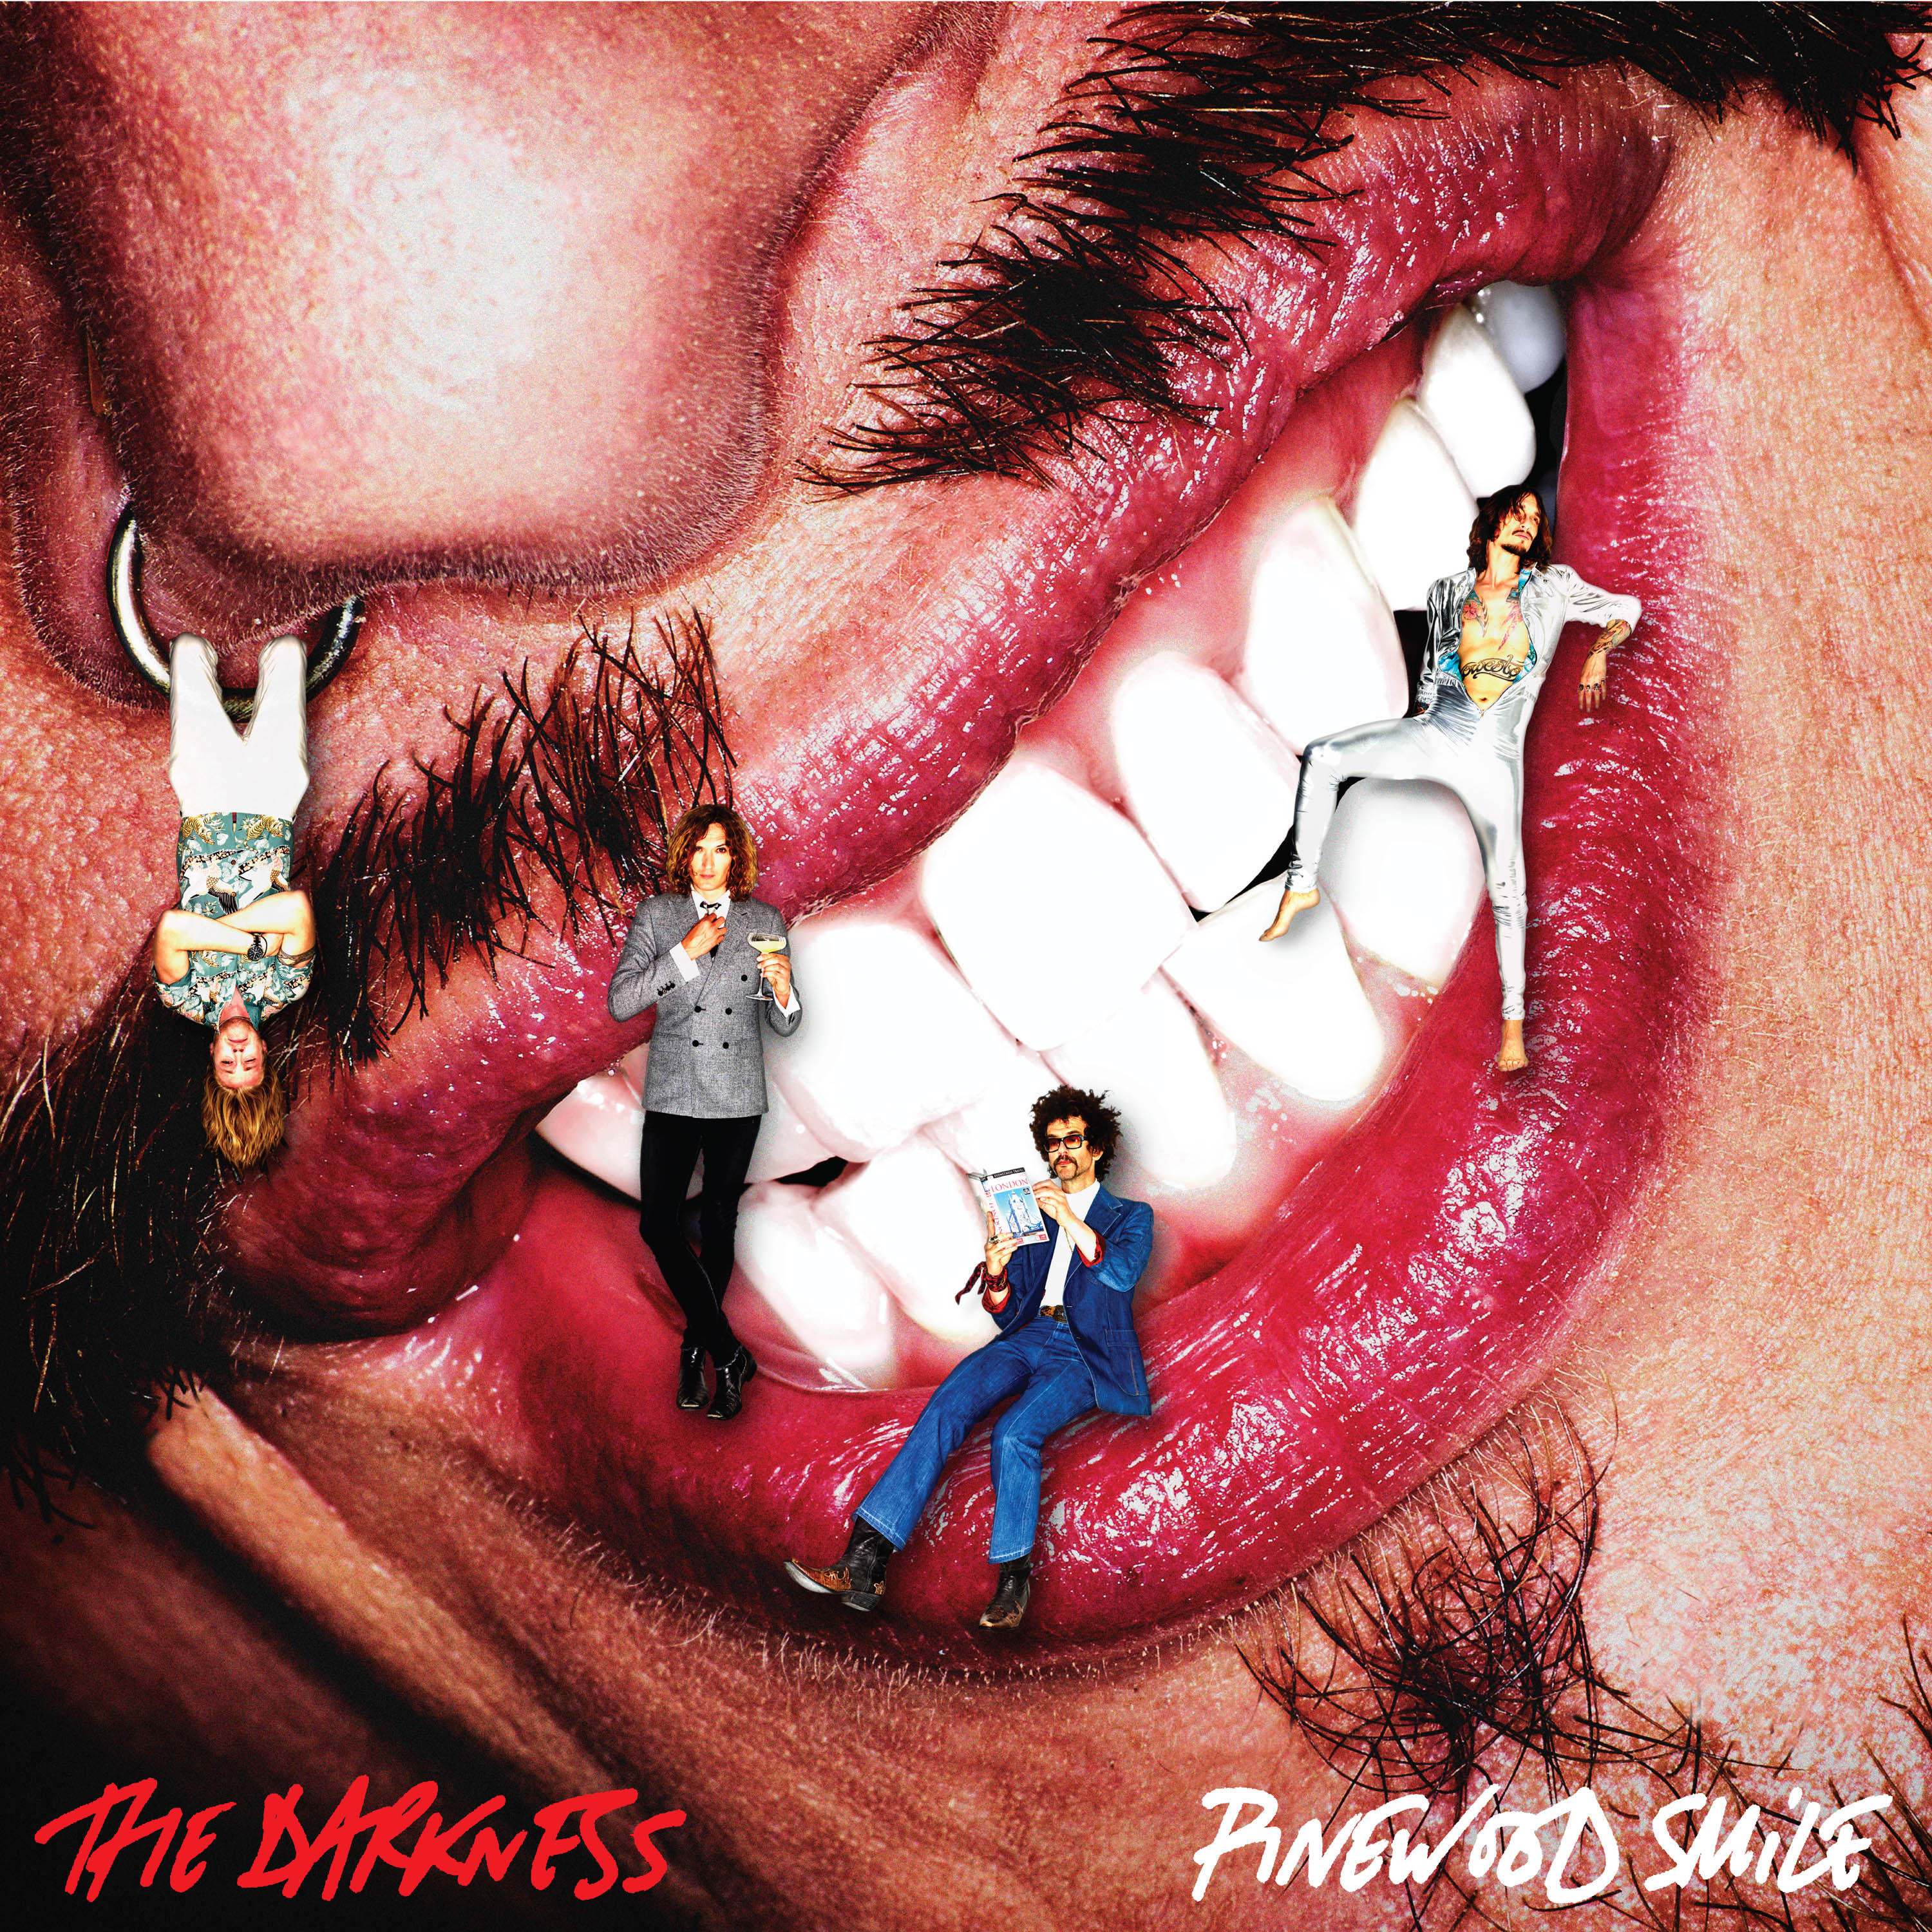 The Darkness - Pinewood Smile (Deluxe) - CD